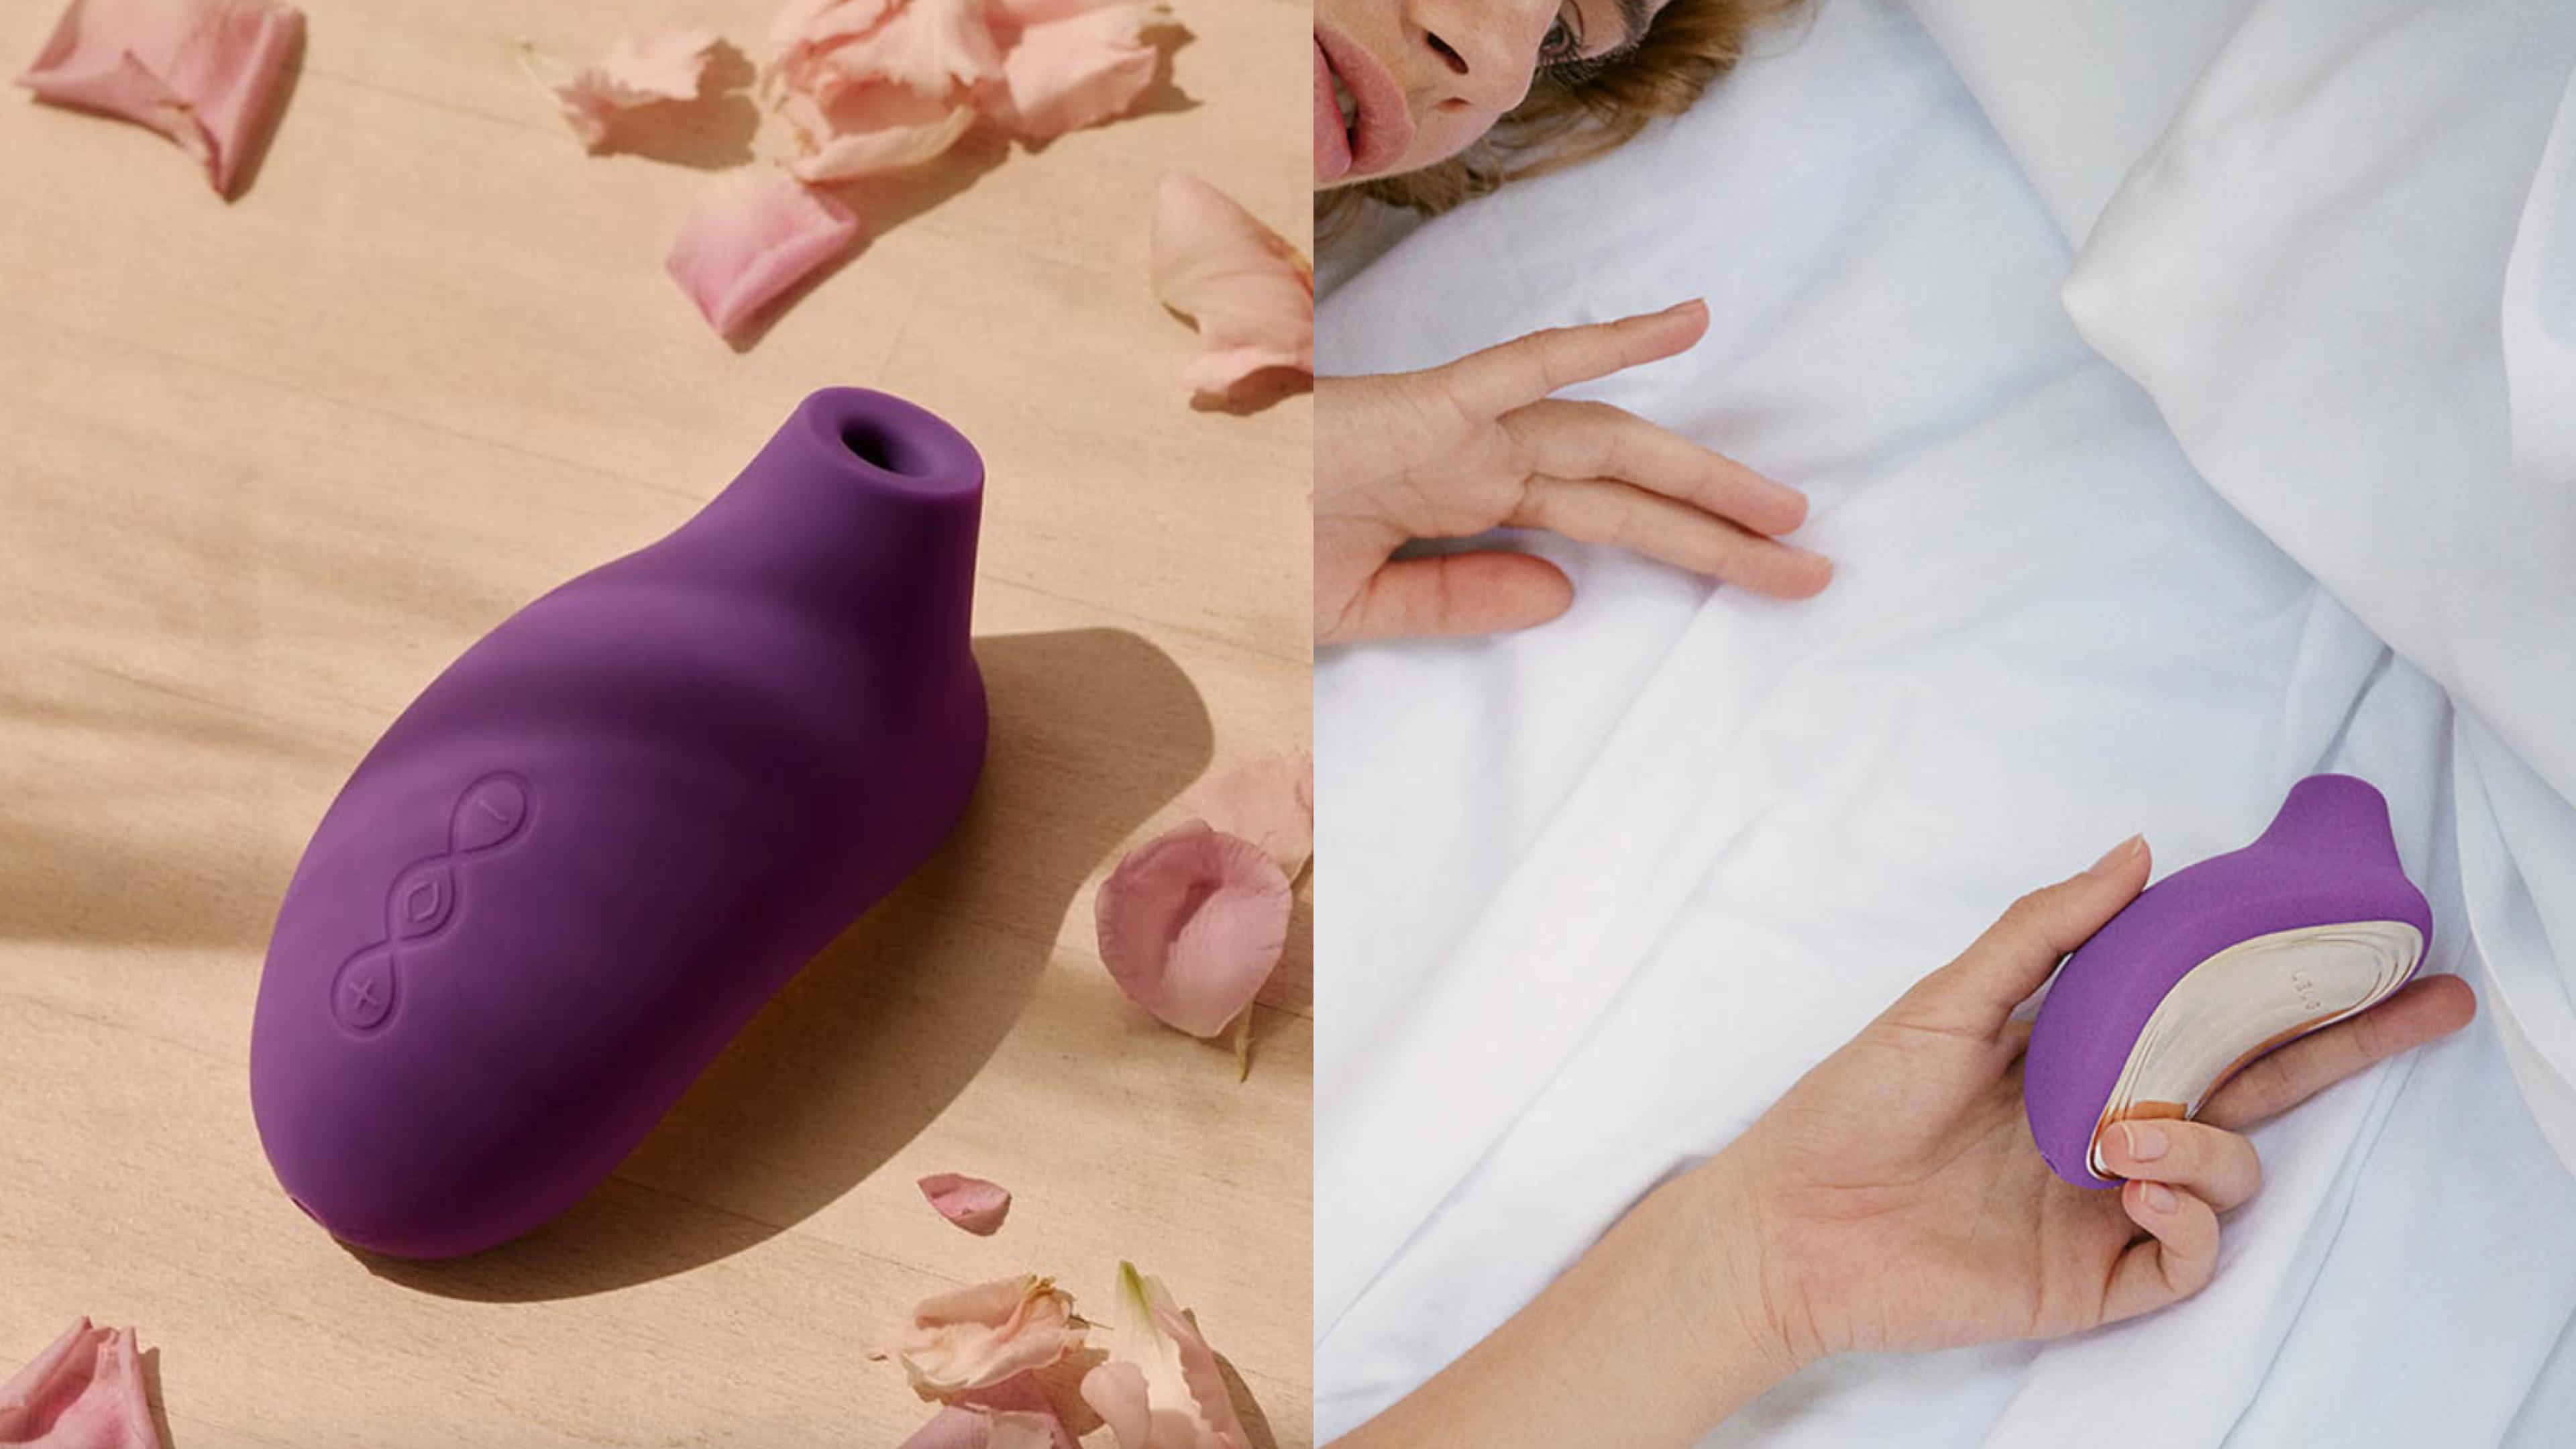 silicone vibrator that focuses on clitoral stimulation via sonic pulses